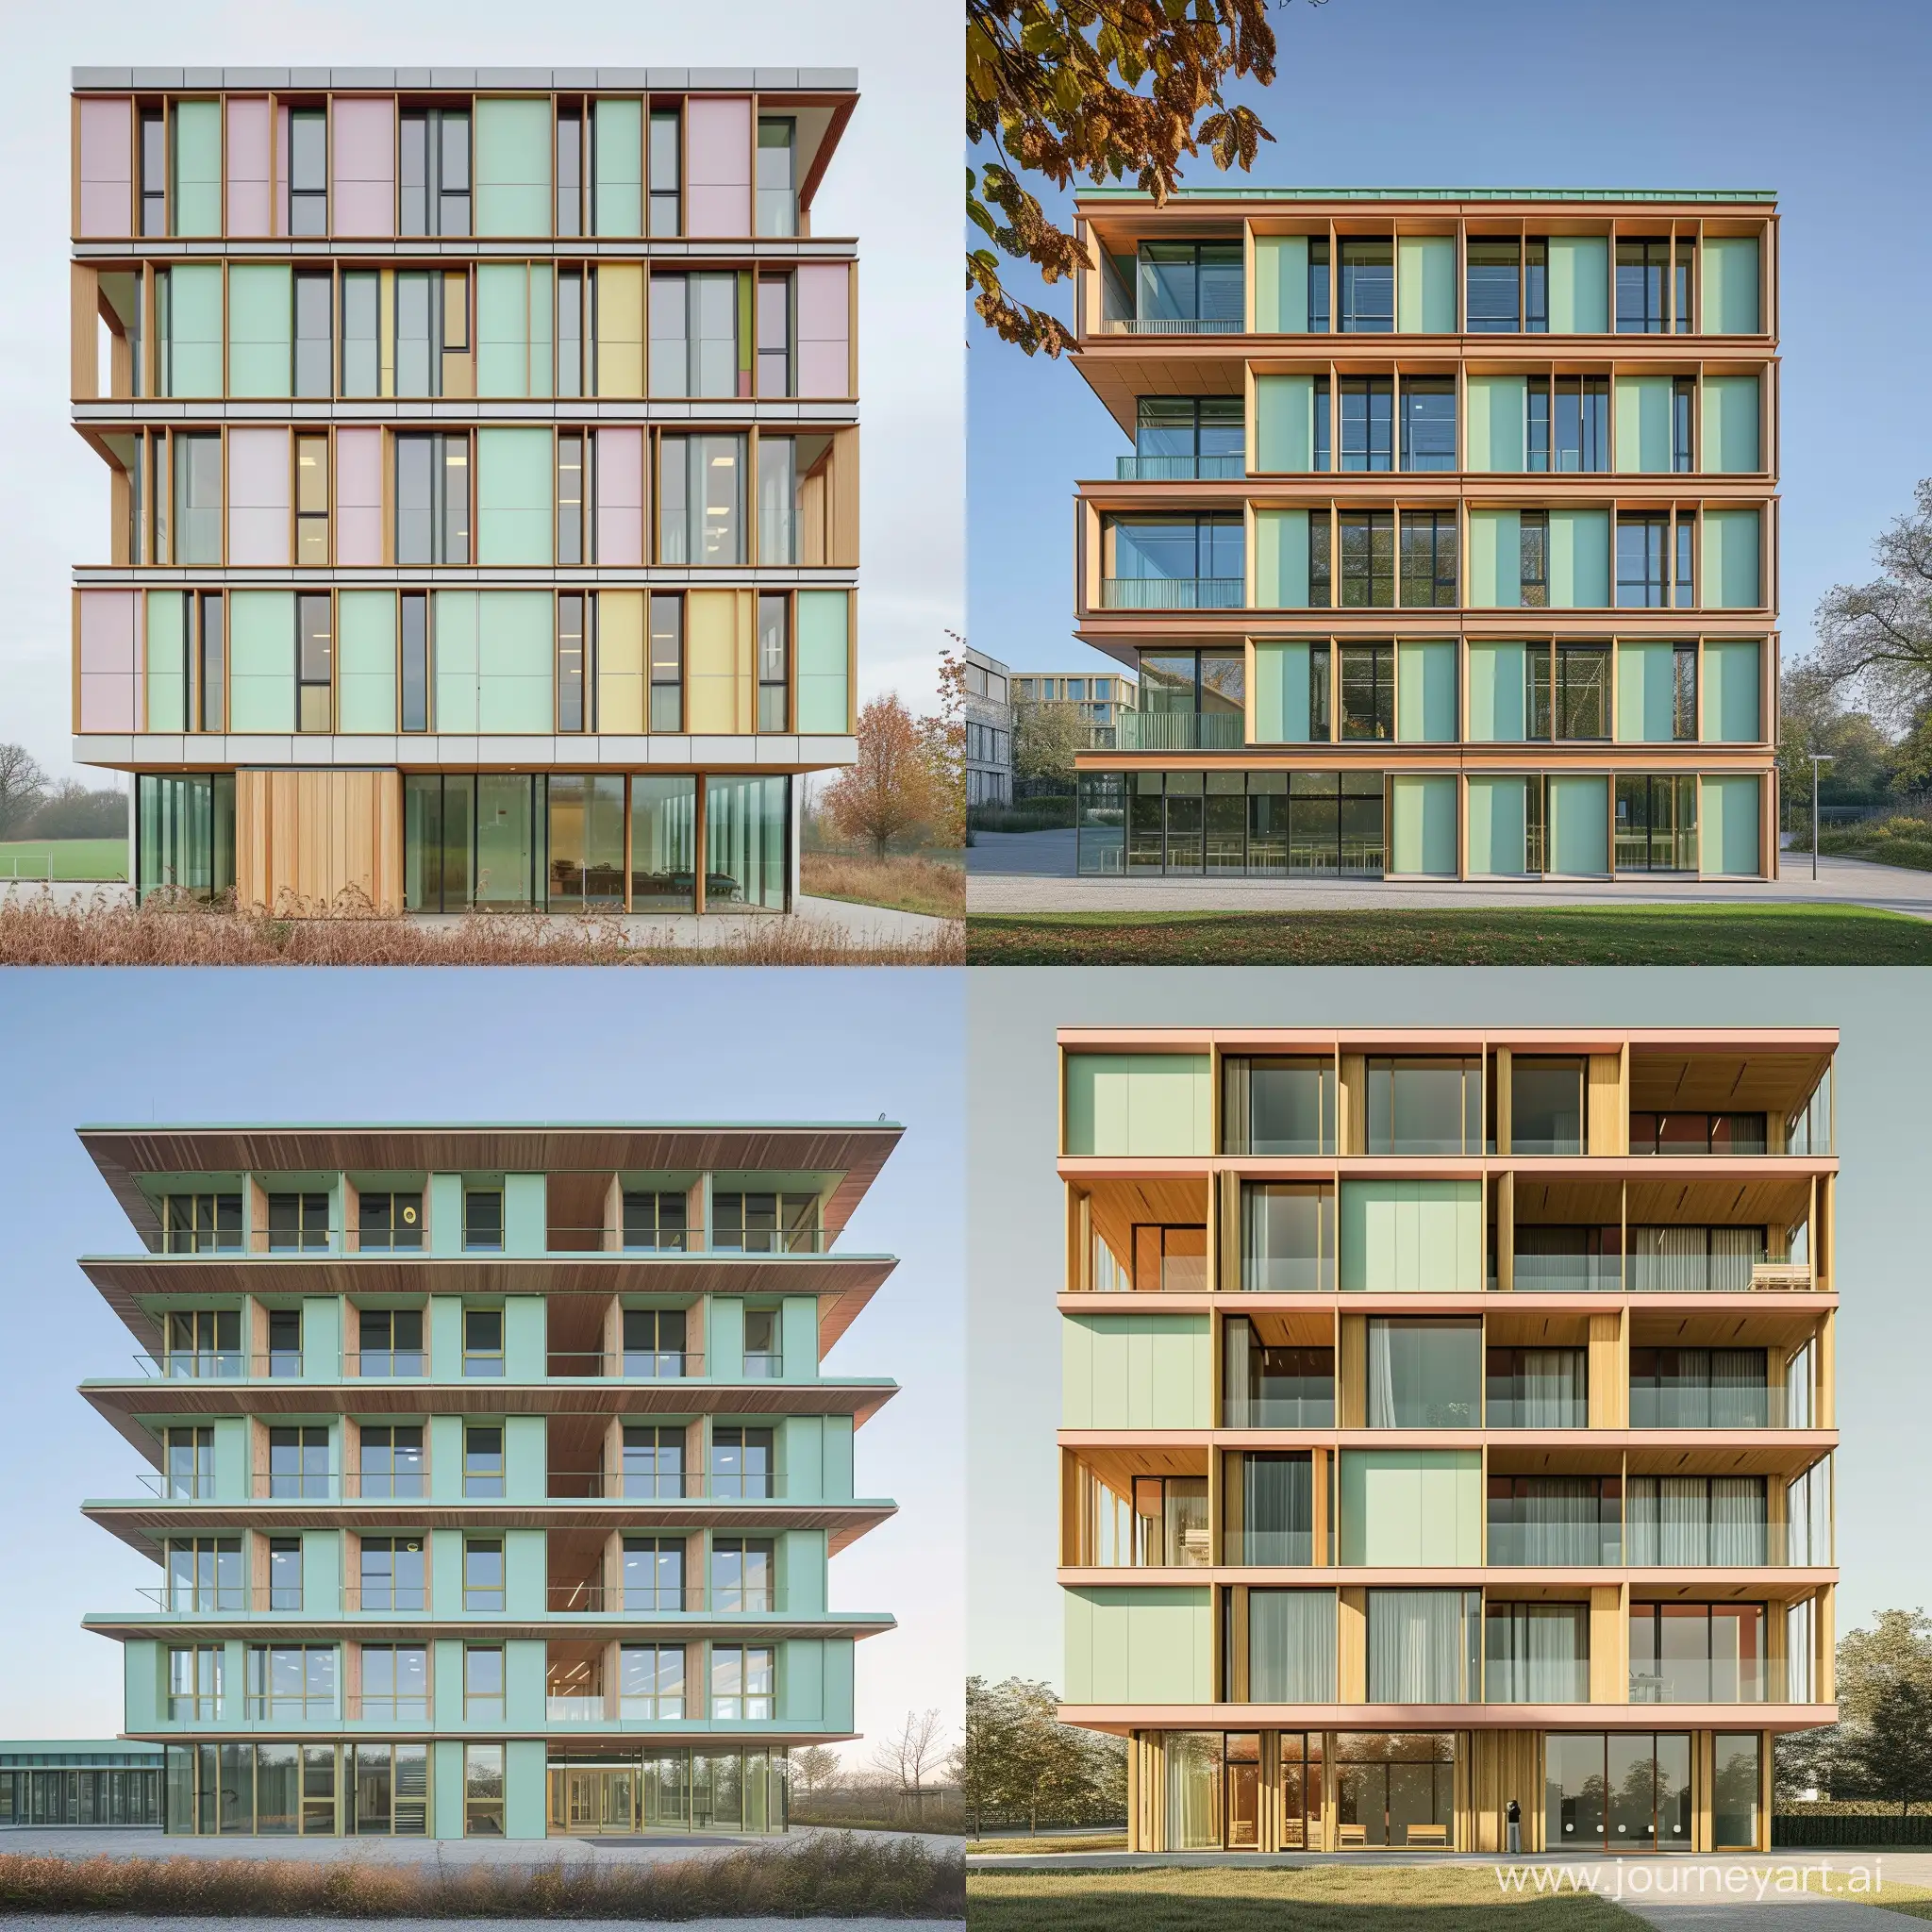 Modern-Wood-and-Glass-University-Building-with-Green-Architecture